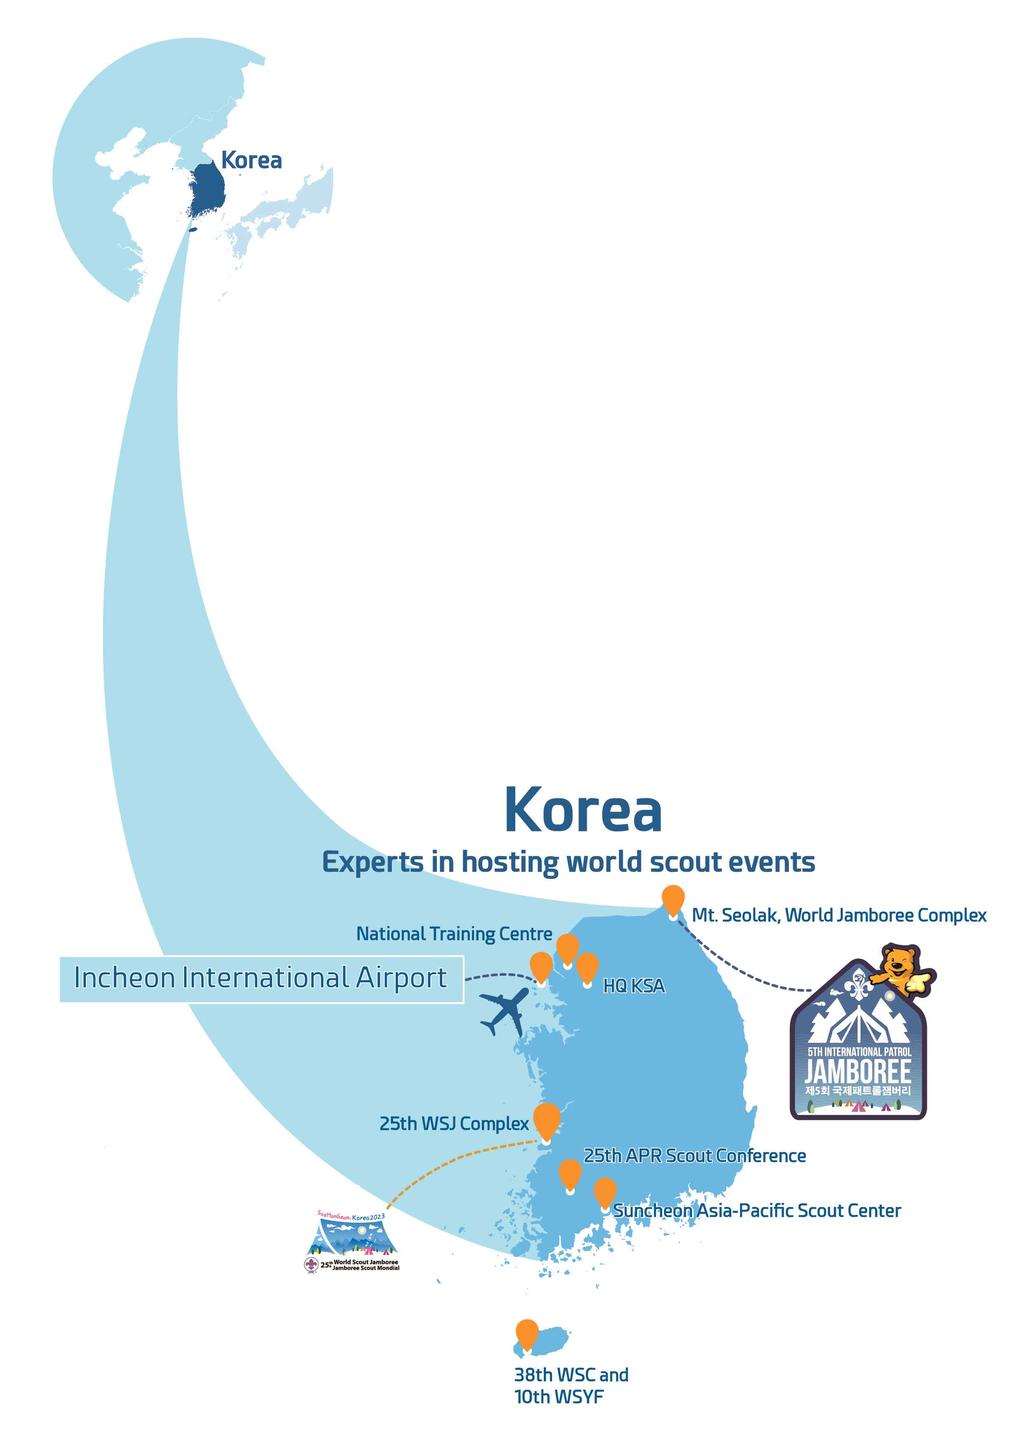 Accessibility - Main entry : The official entry point will be the Incheon International Airport. We will provide inland transportation between Airport to Jamboree venue.